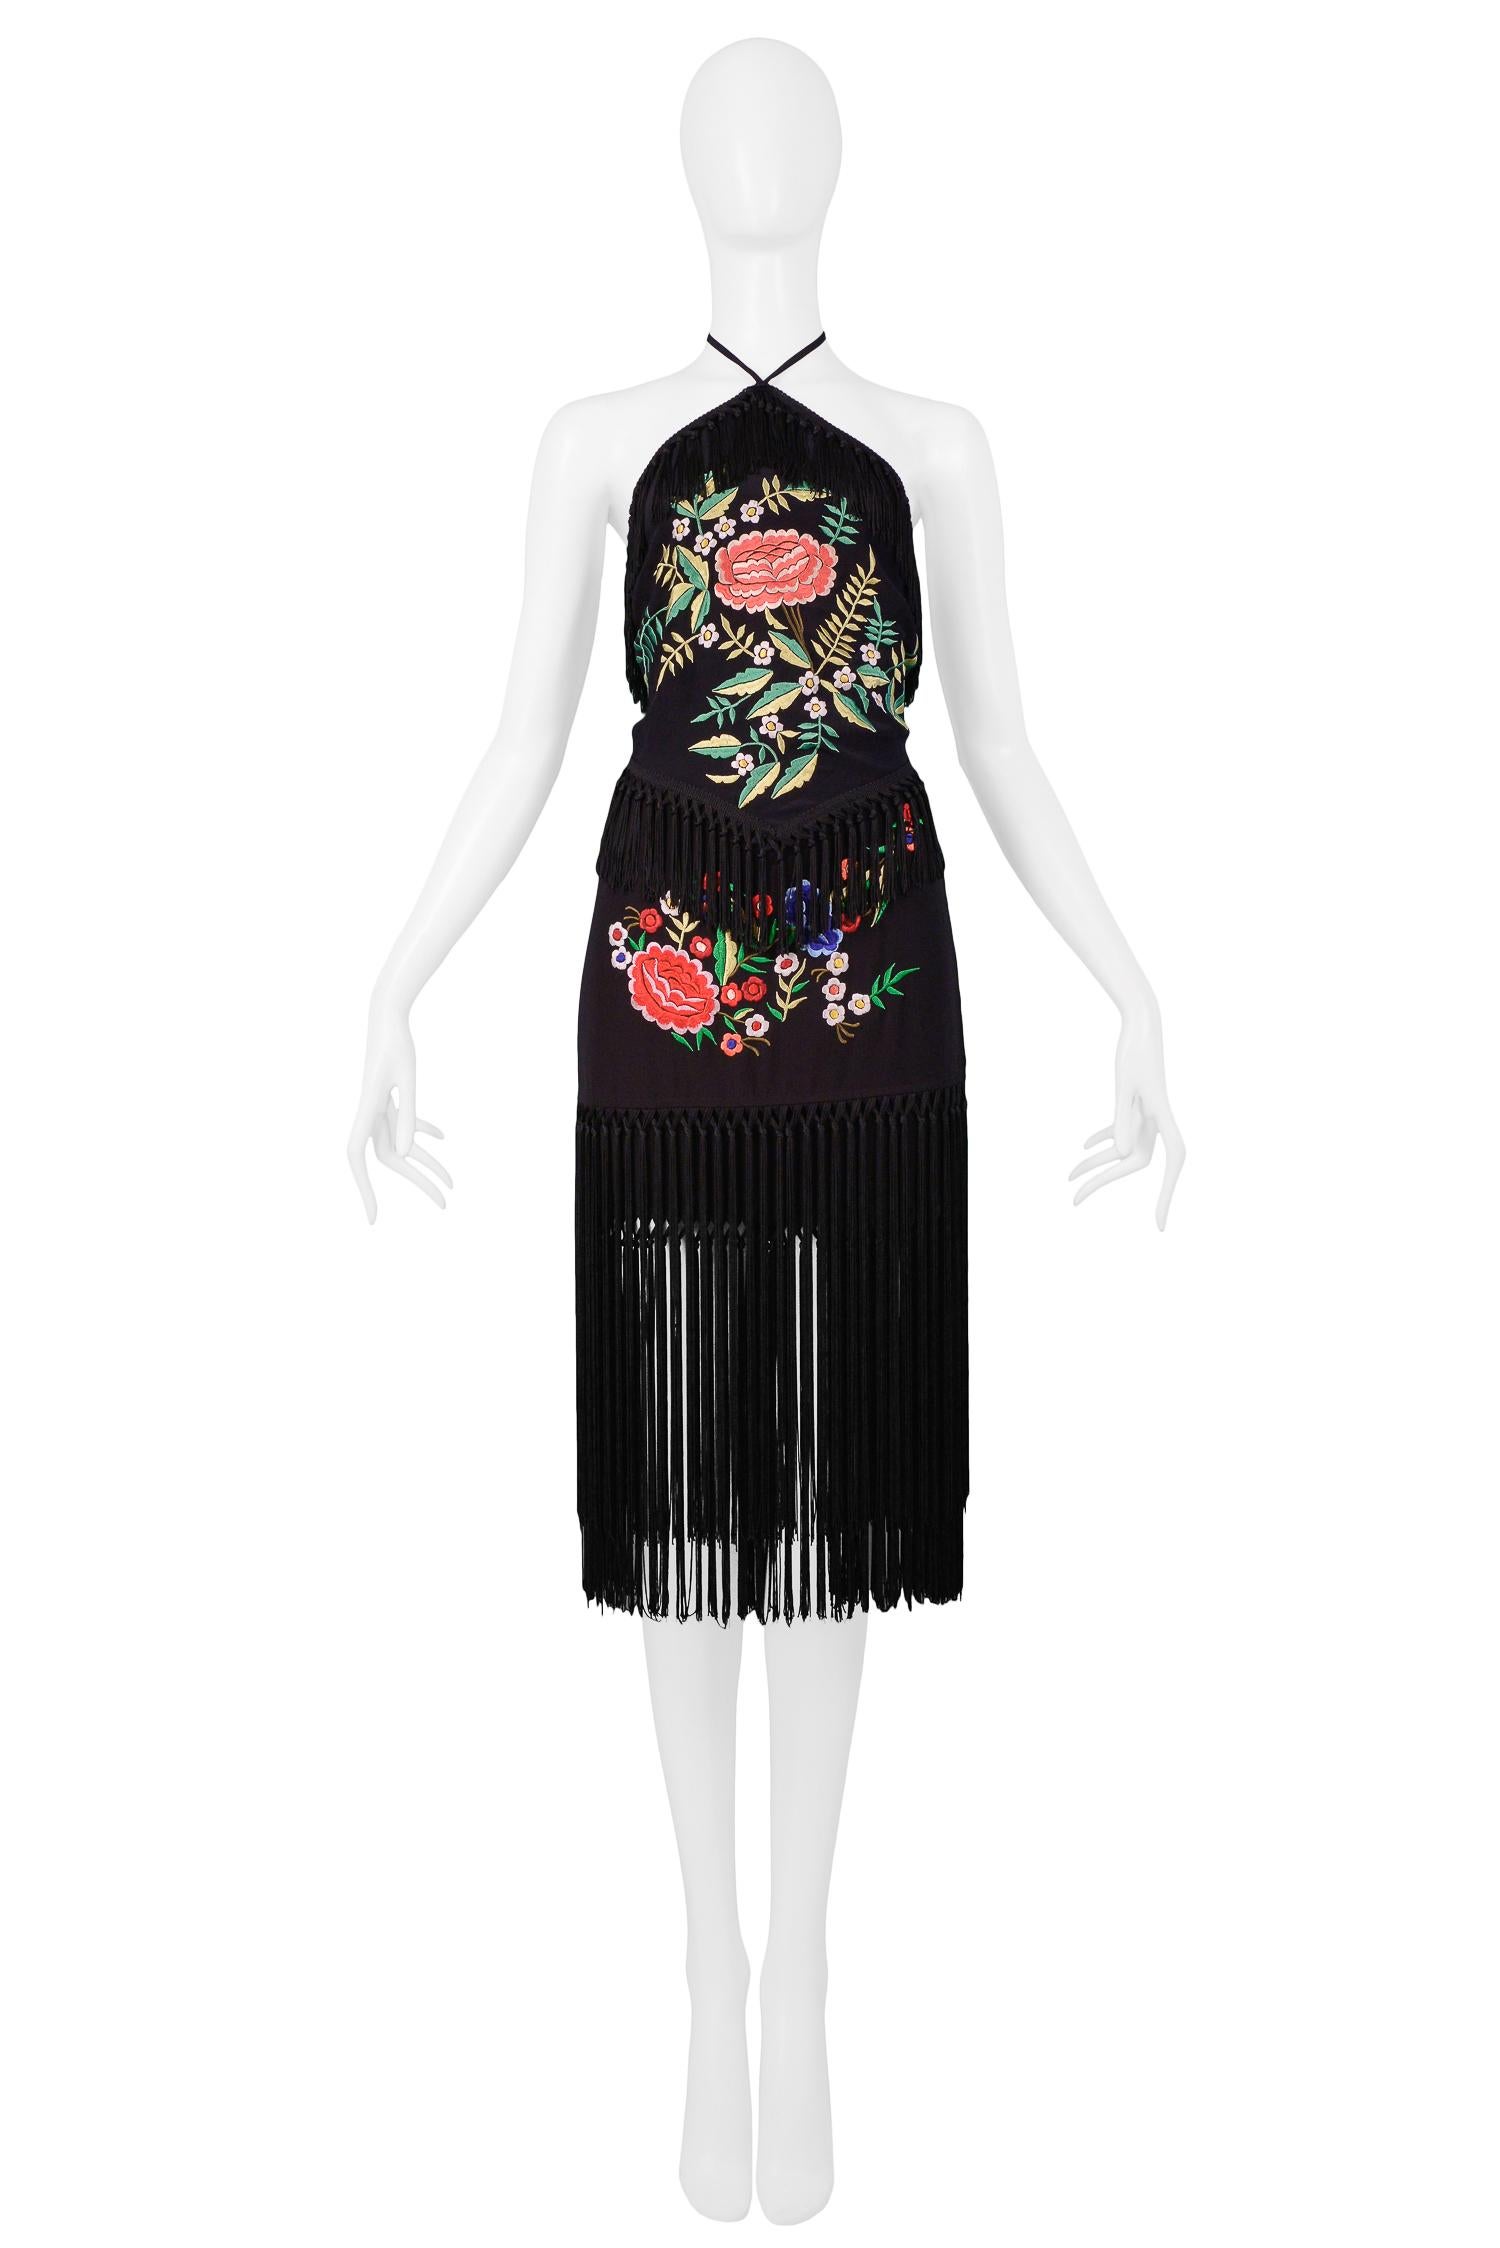 Vintage Moschino black embroidered floral halter top and matching skirt ensemble with fringe detail. Top has ties at neck and back, and skirt is wrap style with button closure at waist.

Excellent Vintage Condition.

Top Size: 44
Skirt Size: 44

Top